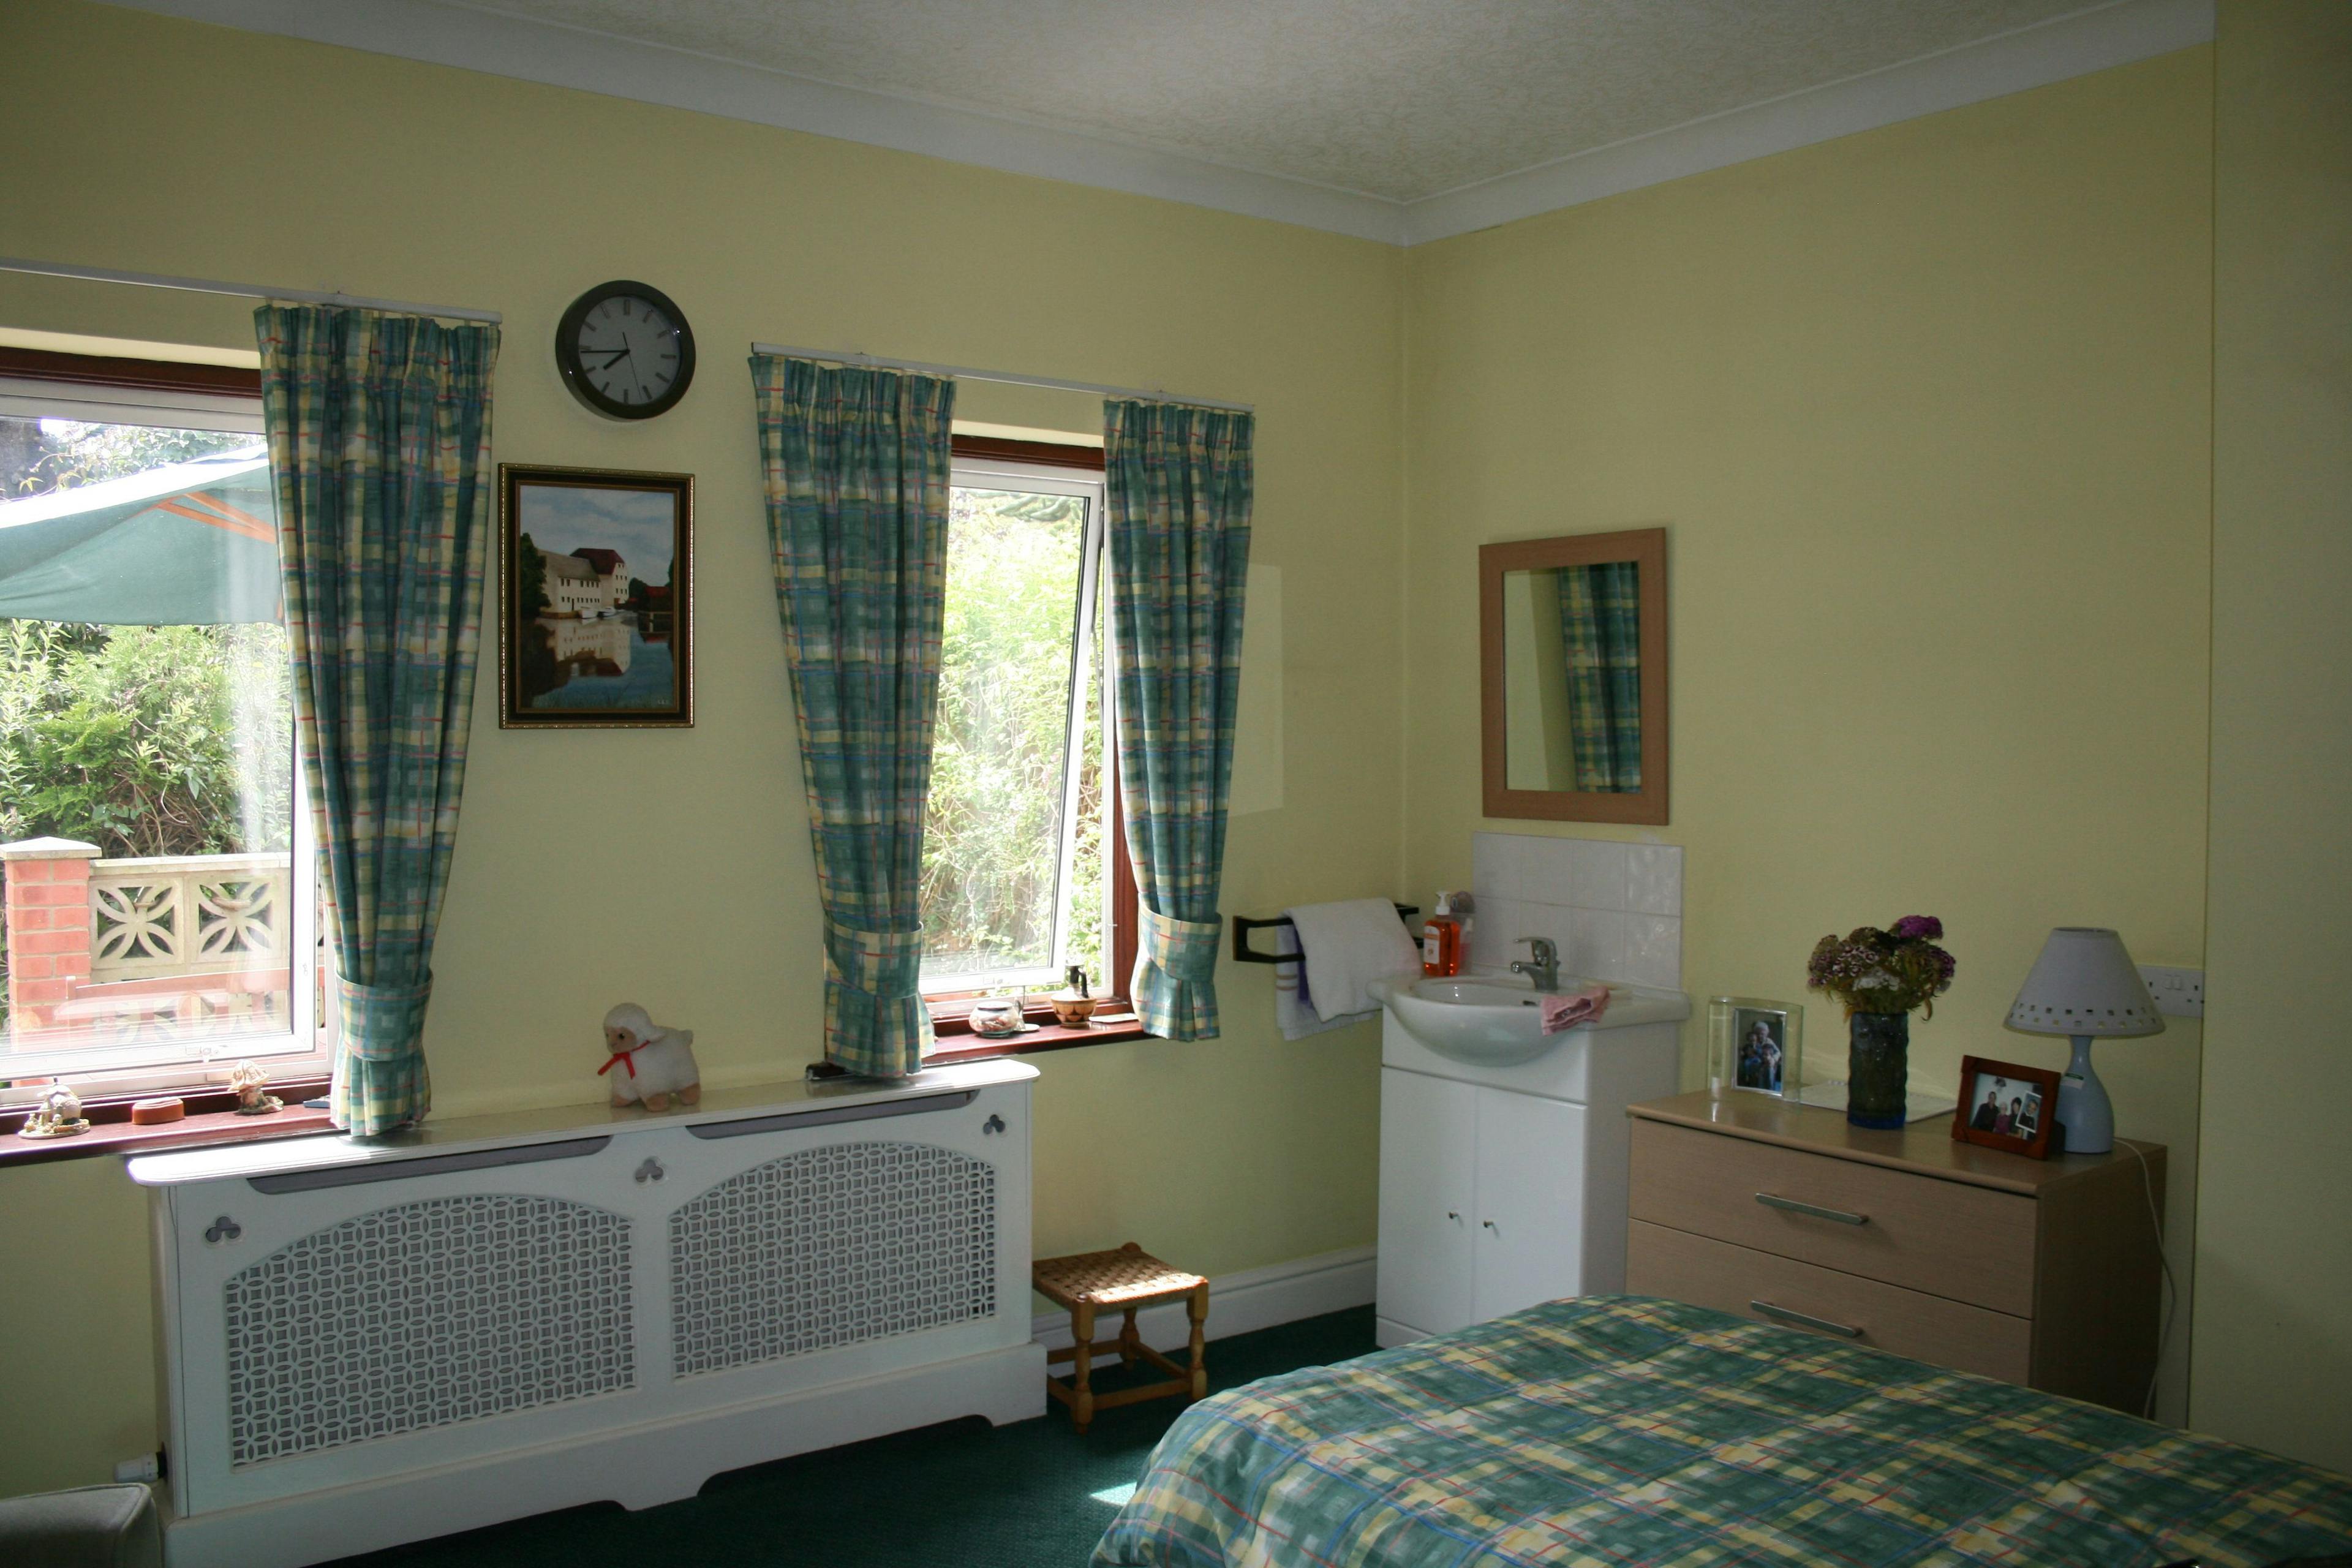 Ashglade care home in Bromley 1